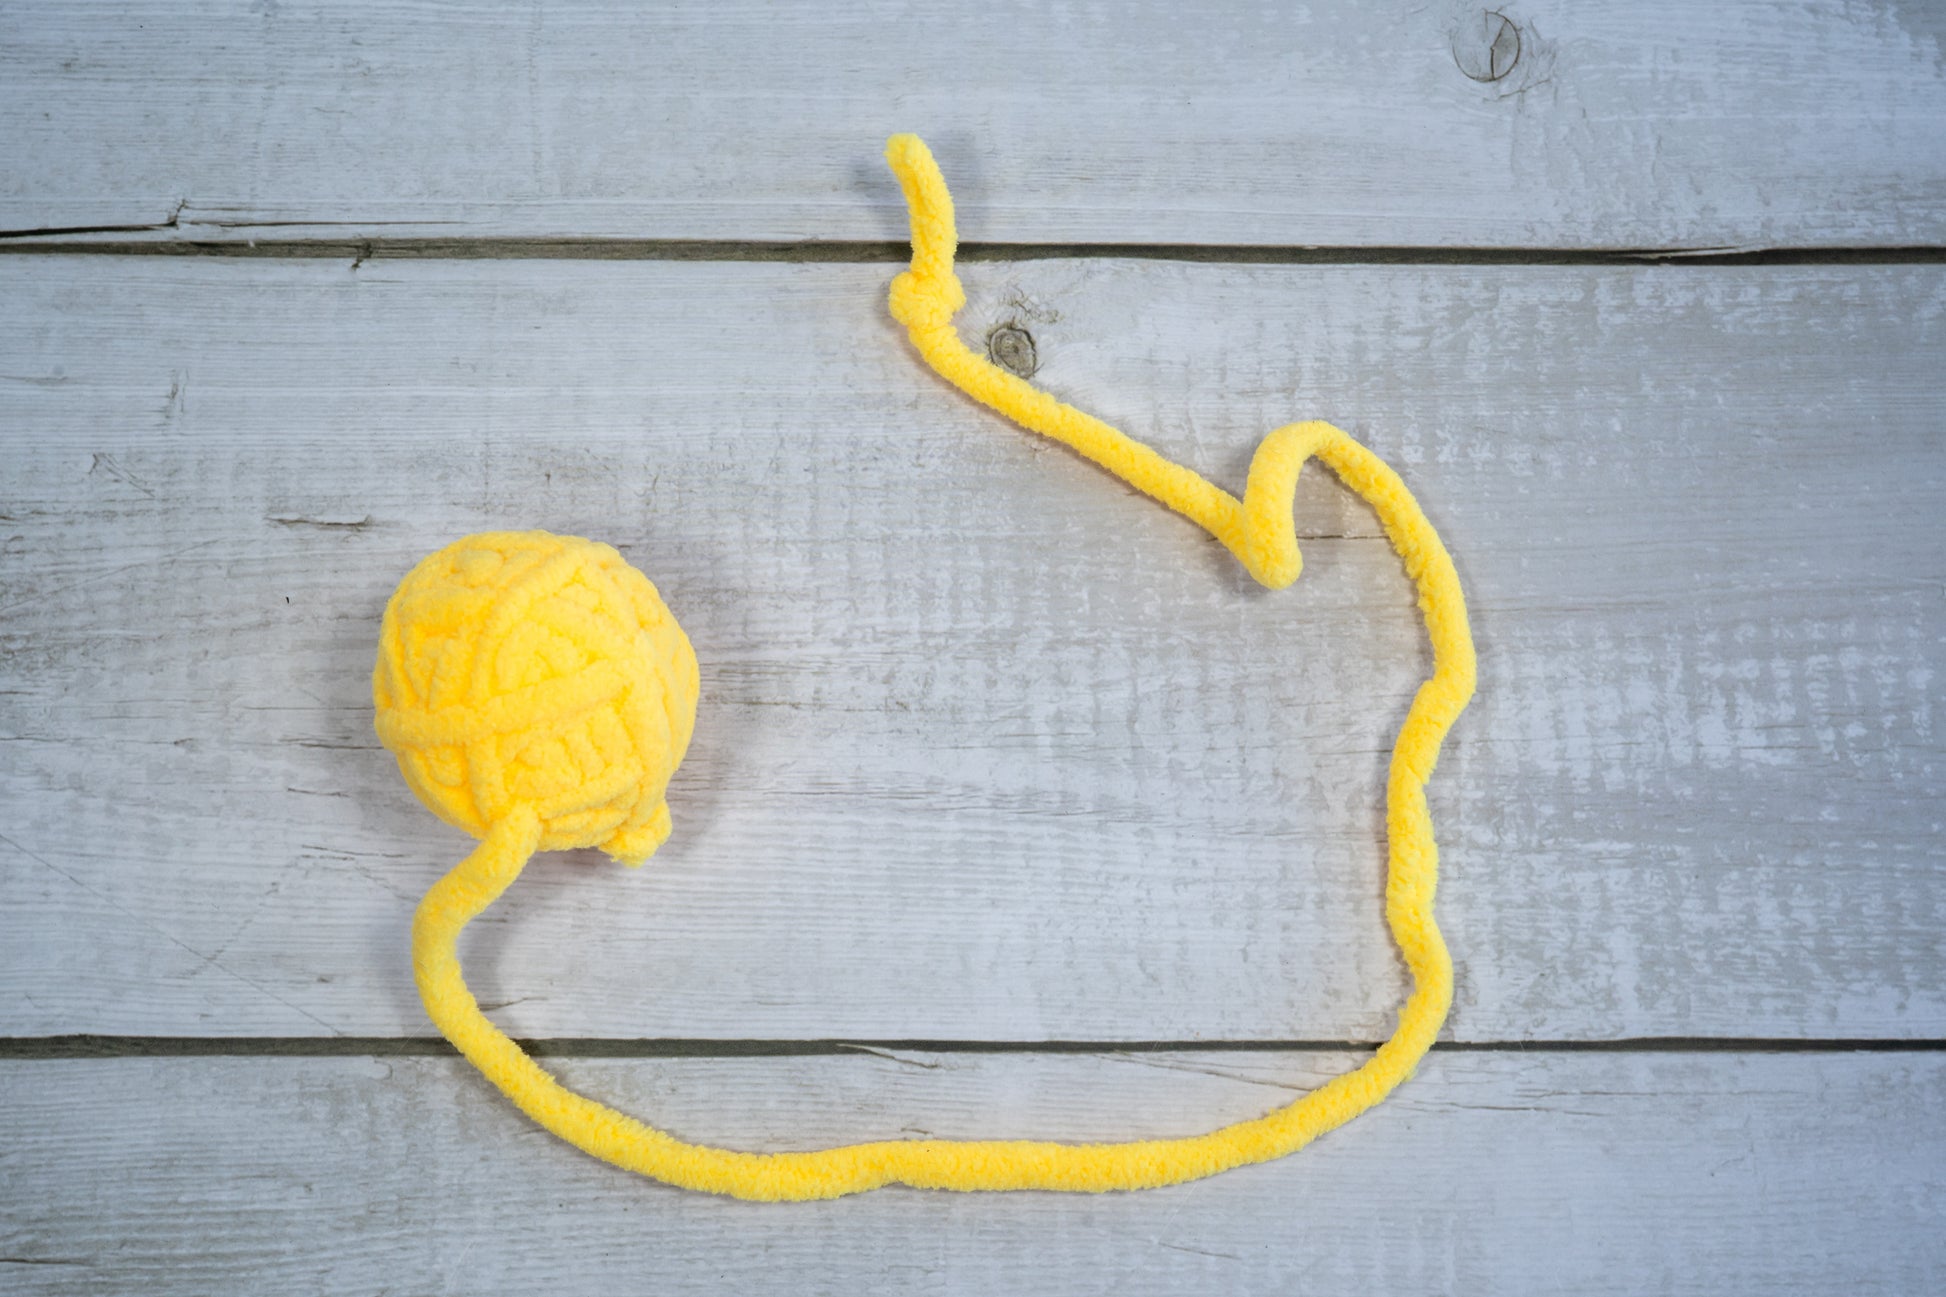 Small yellow wool ball with tail for cats. | Petite pelote de laine jaune avec queue pour chat.